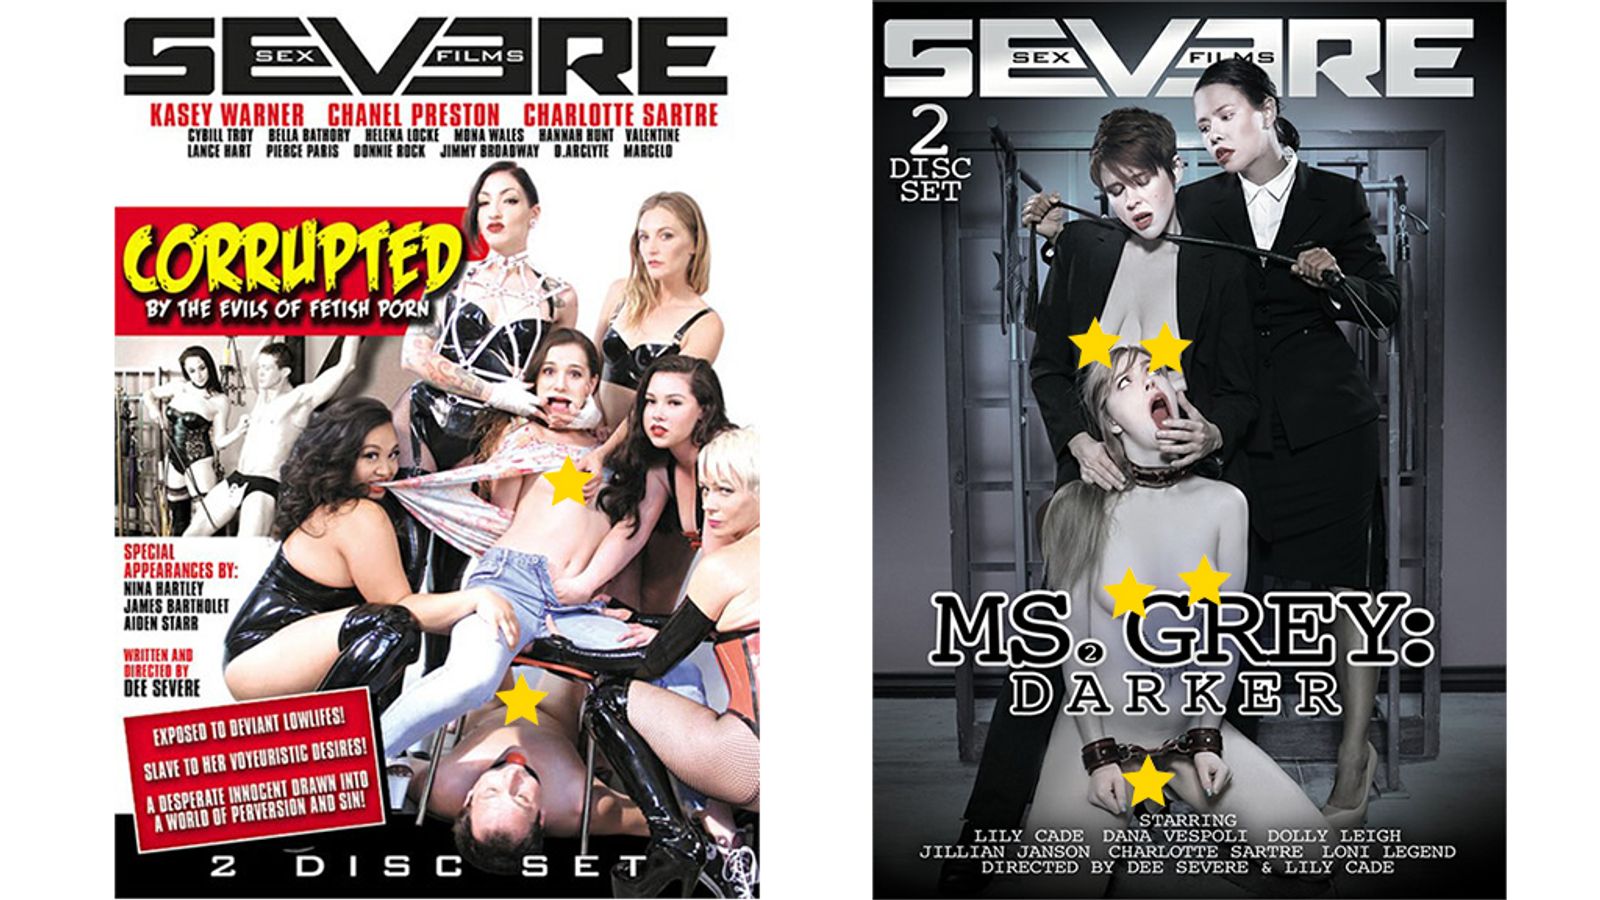 Severe Sex Films Earns 3 XRCO Awards Nominations